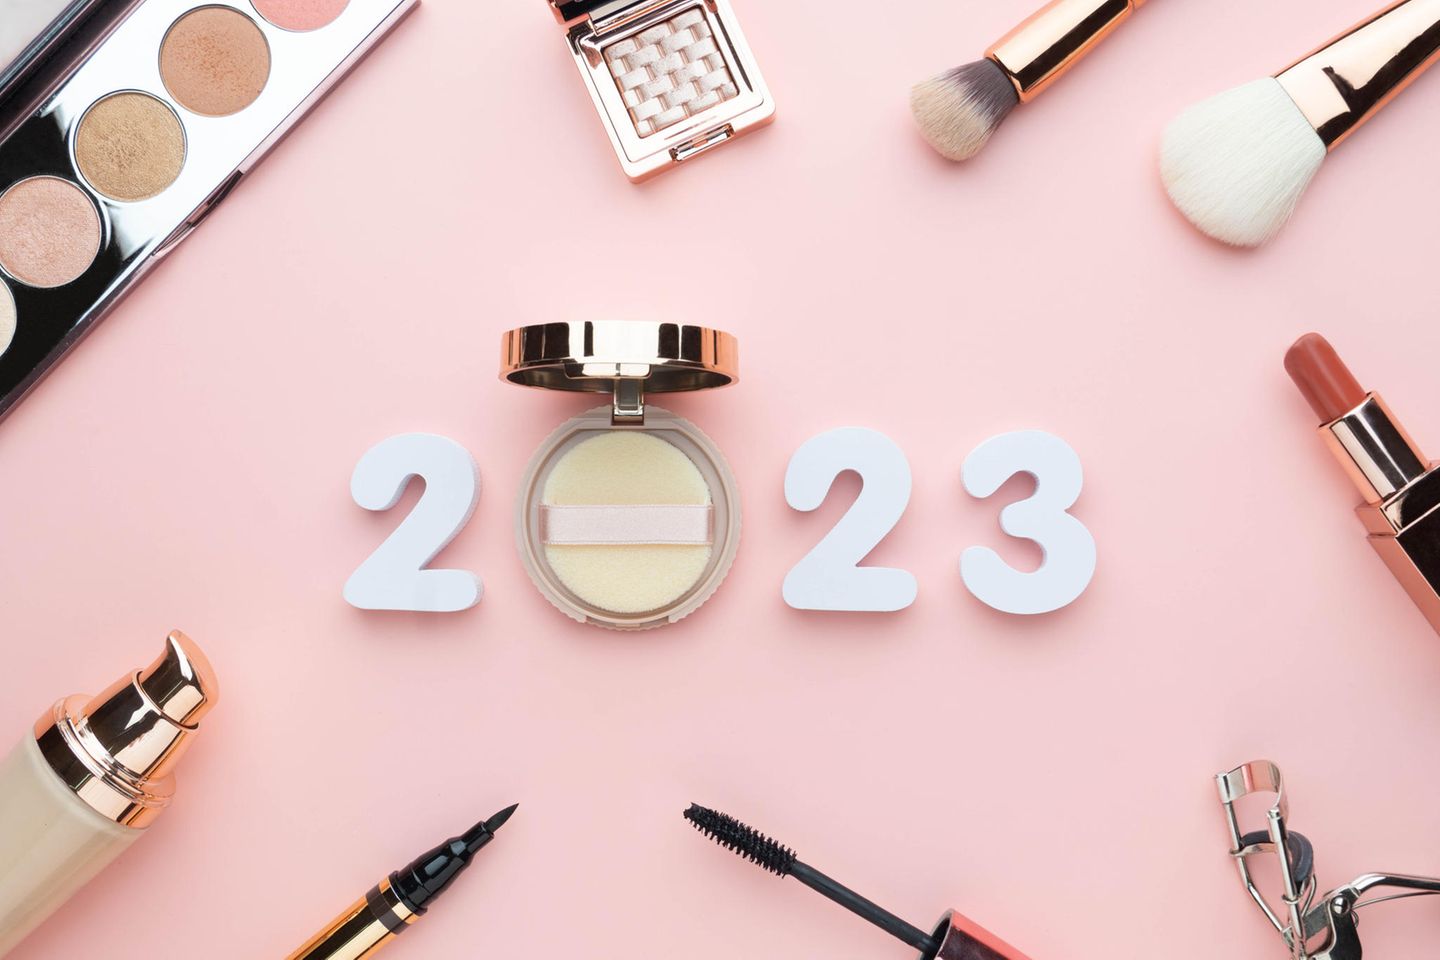 The editors' beauty resolutions: We want to do this differently in 2023!